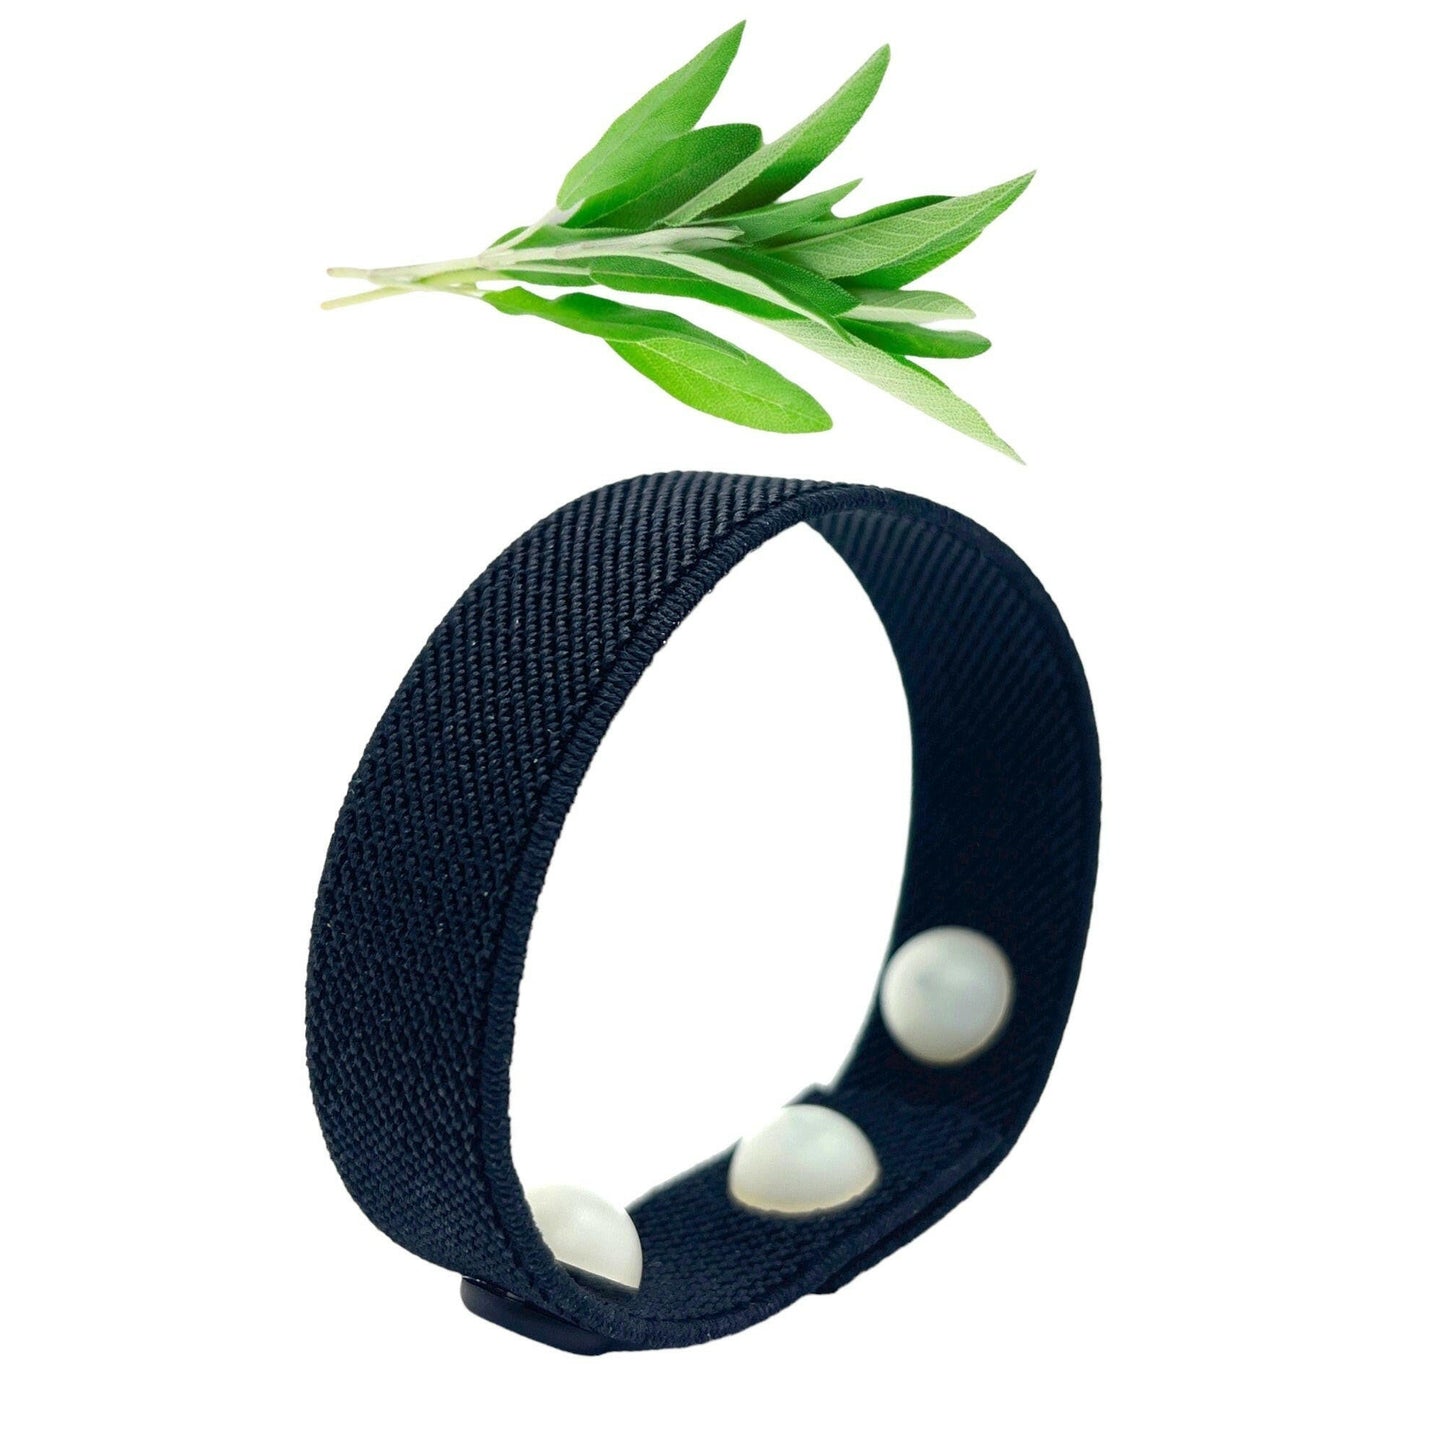 Menopause Relief Bracelet- Natural Hot Flash, Night Sweats, Sleep Aid - Reduces Anxiety, Stress, Mood Swings - Slip On Acupressure Band- Clary Sage Infused